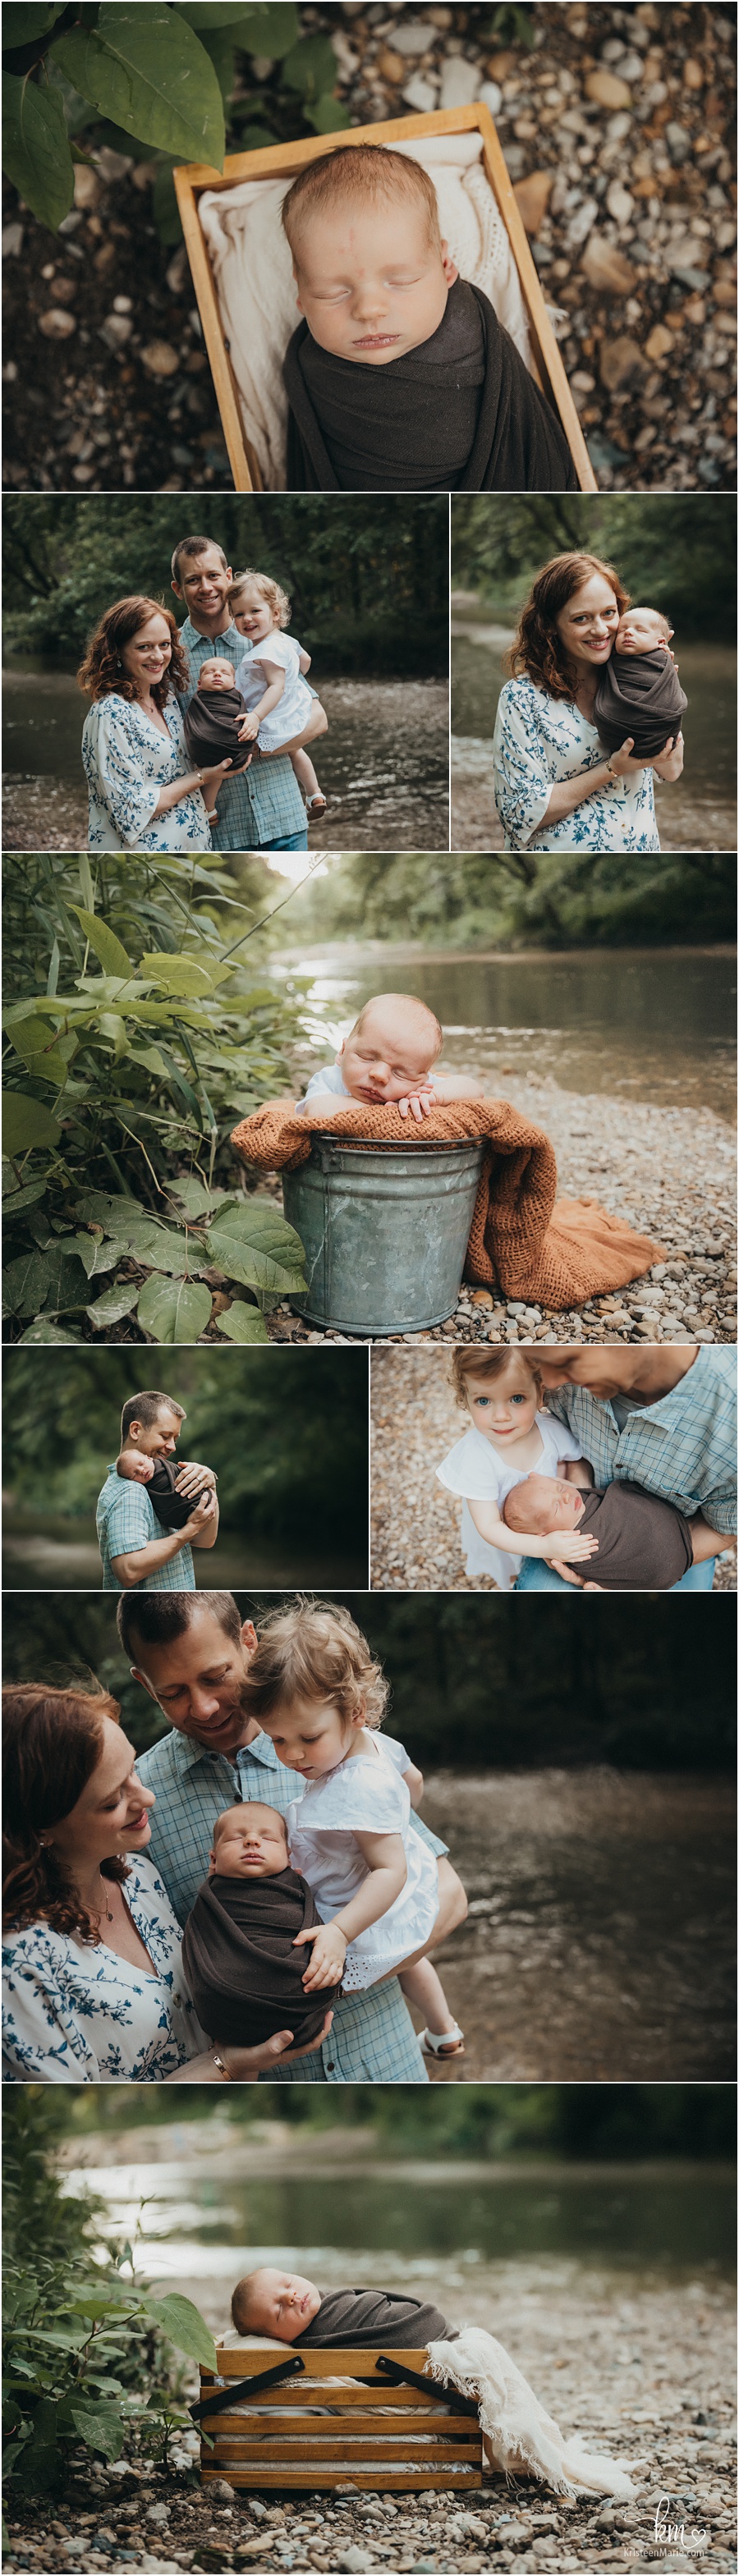 outdoor newborn photography at creek - baby in box and bucket